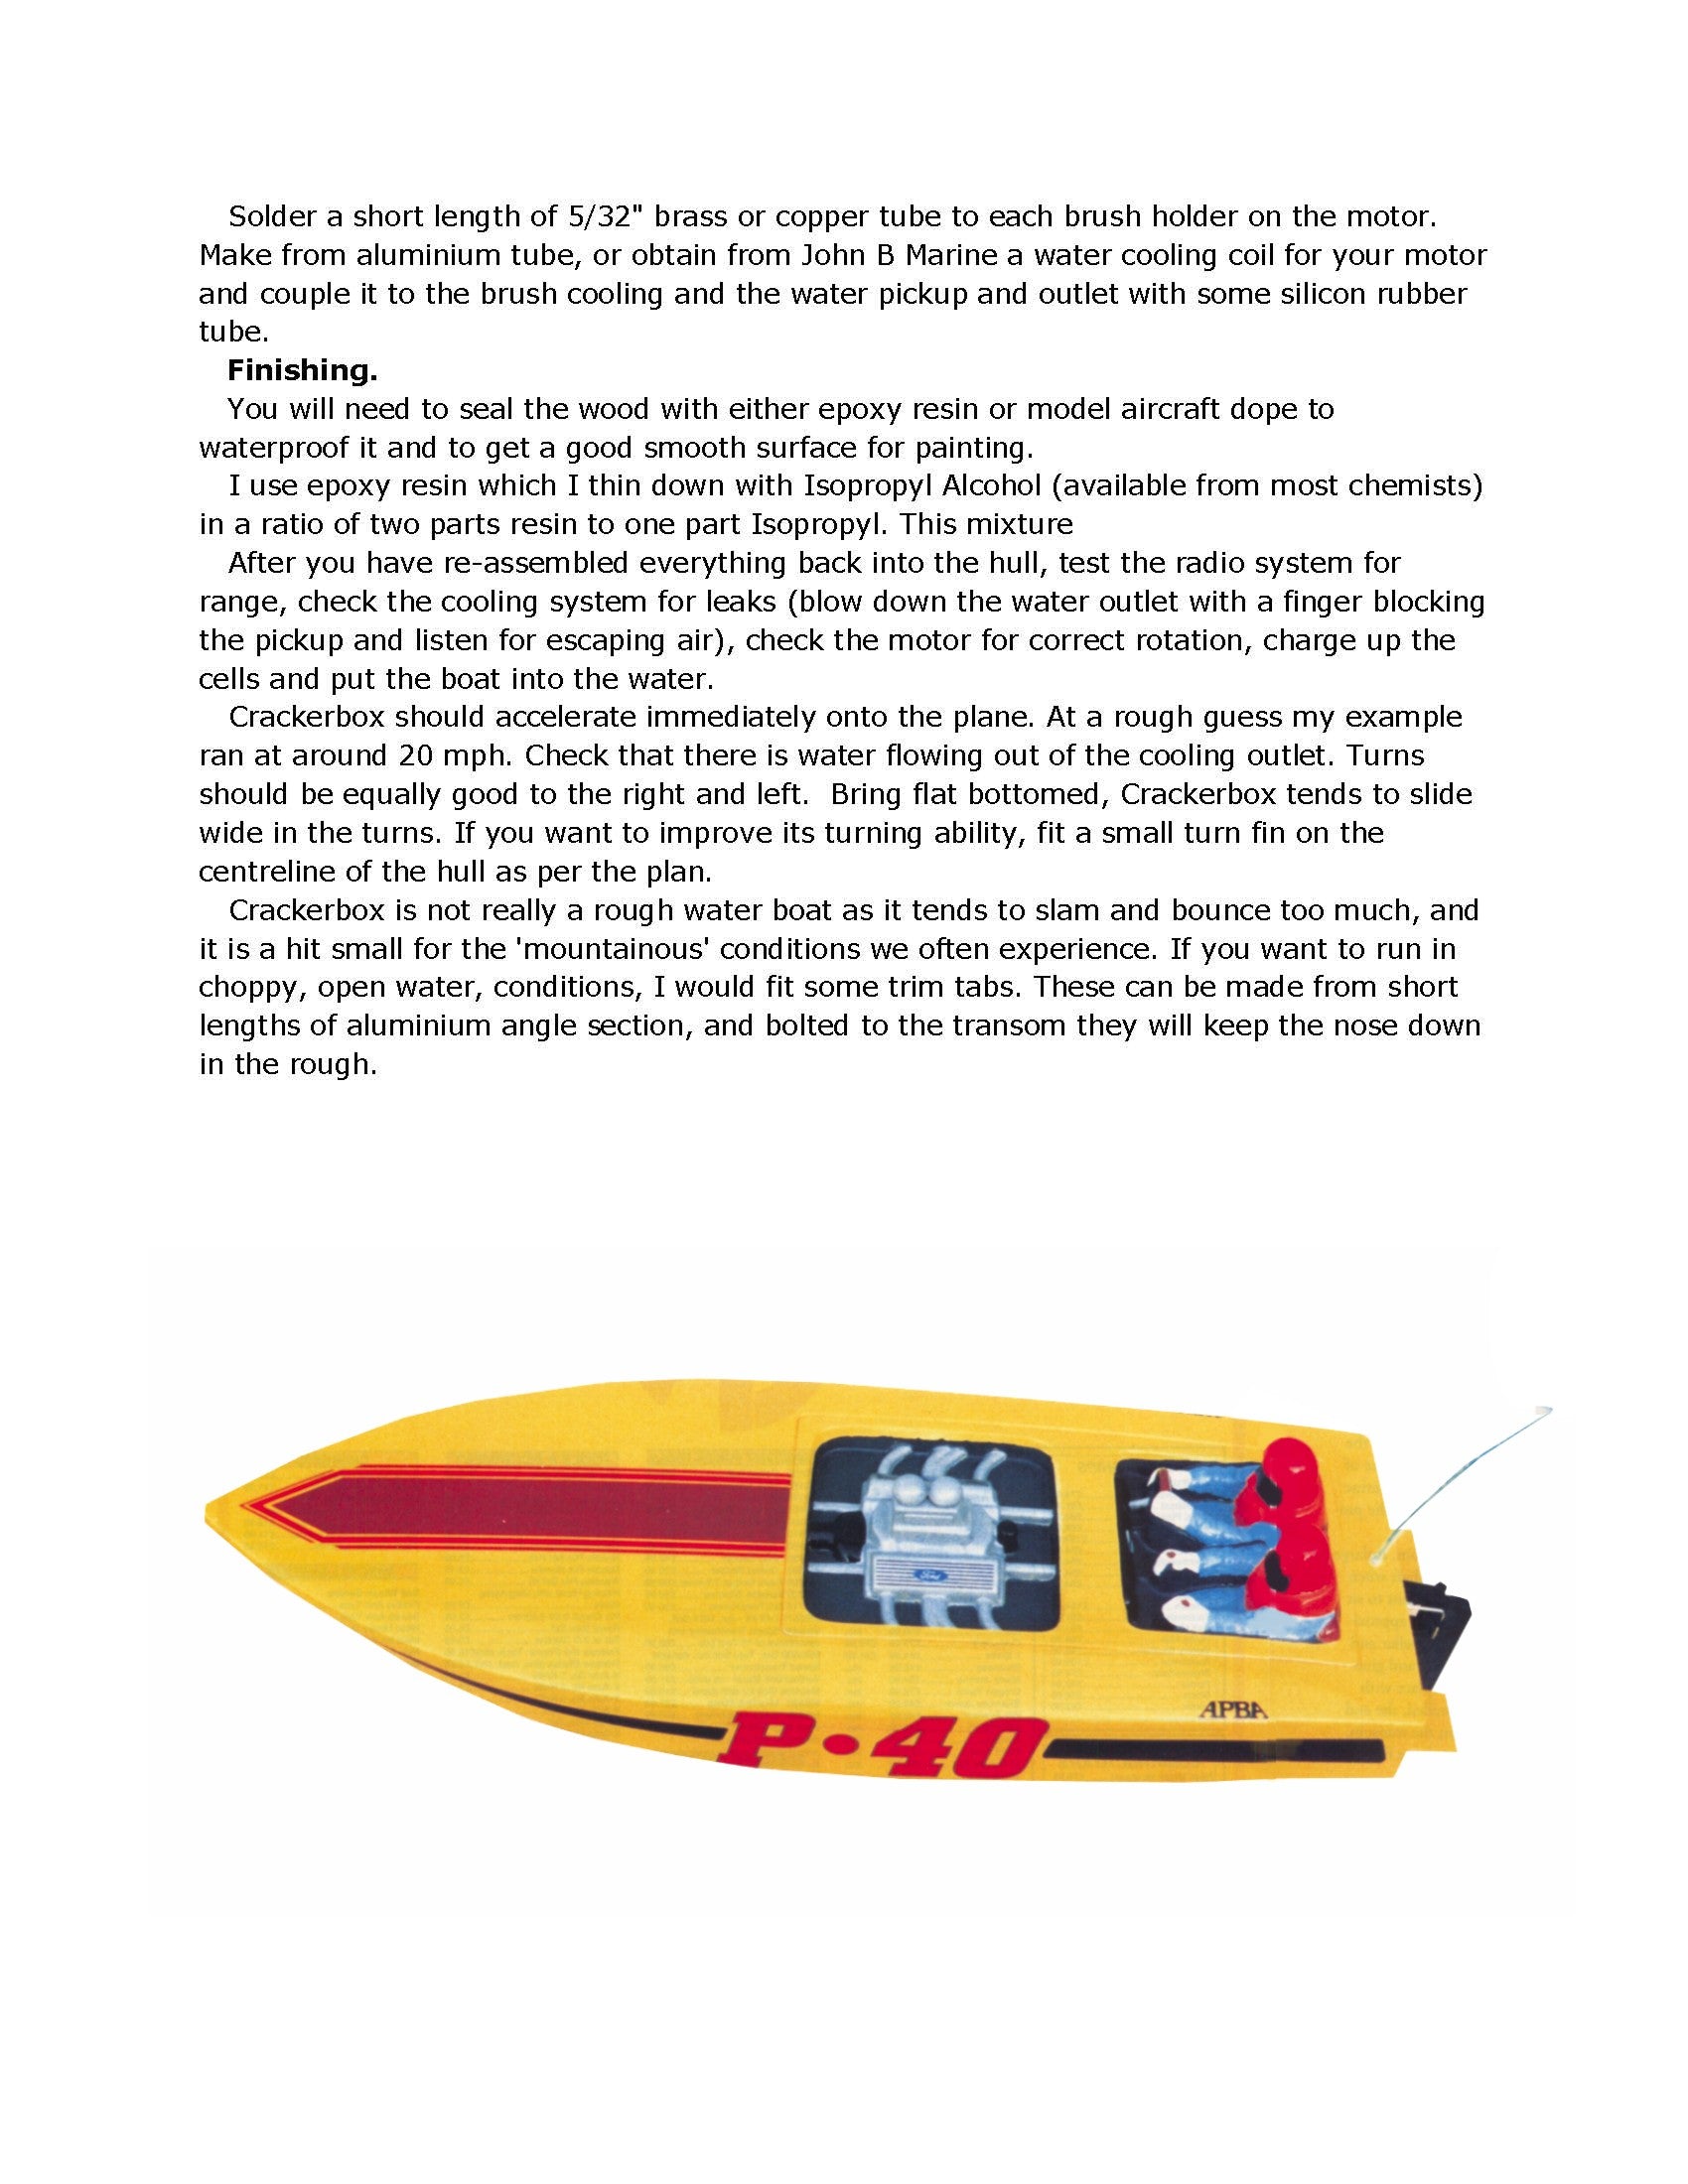 full size printed plan semi-scale racing boat crackerbox for radio control